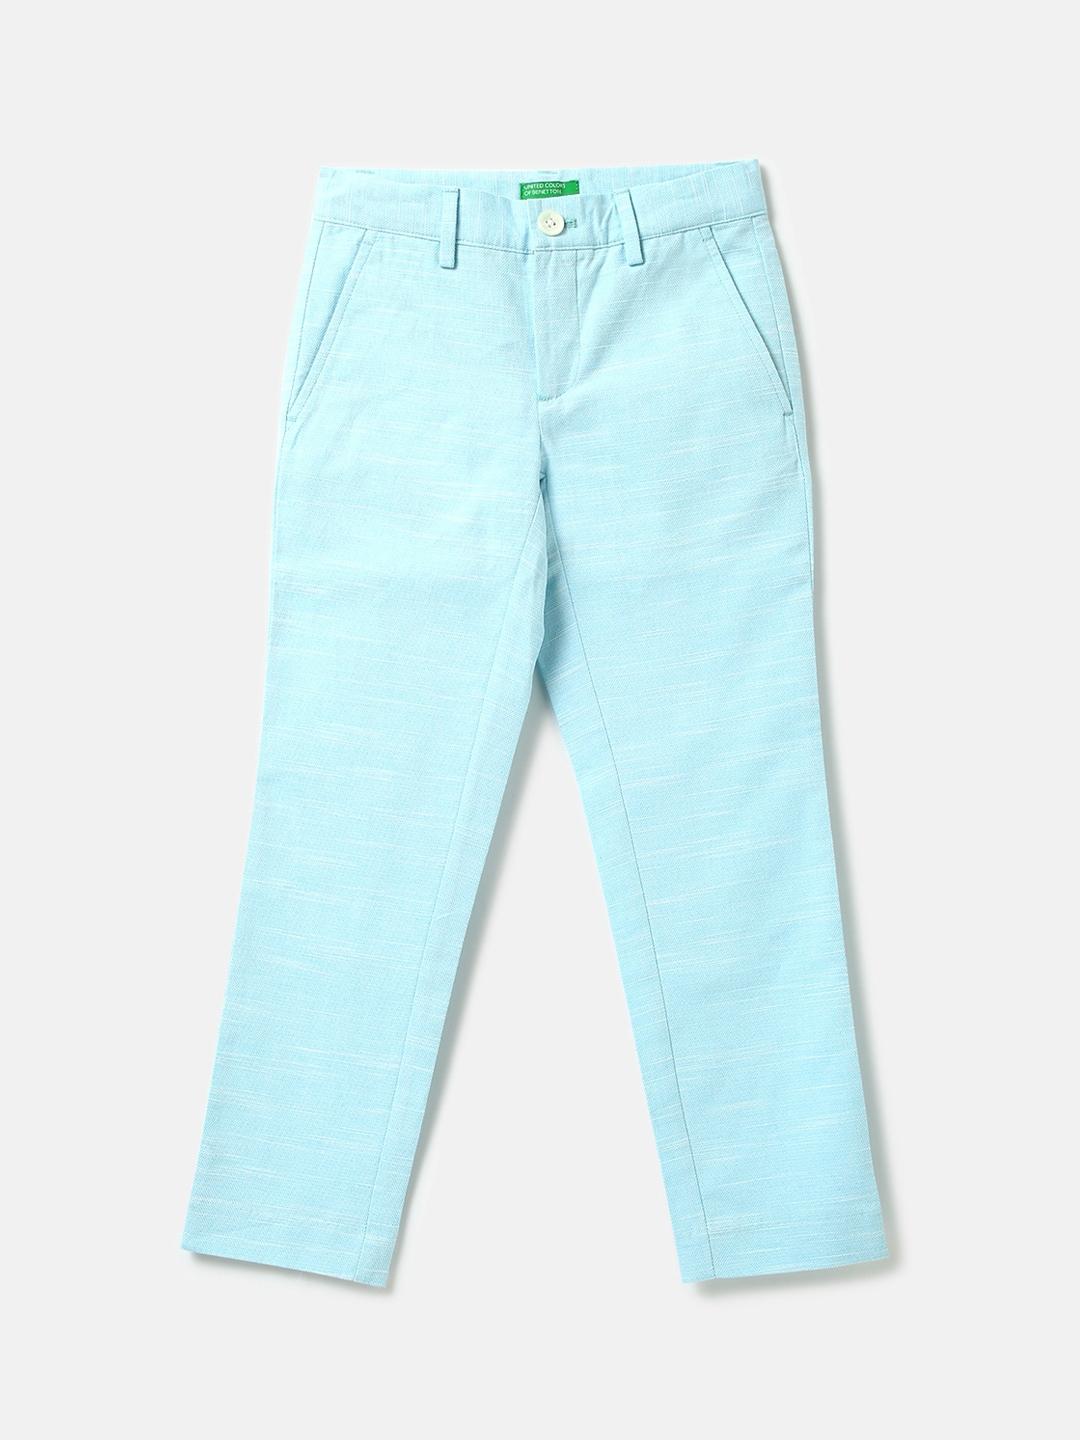 United Colors of Benetton Kids Boys Cotton Mid Rise Regular Fit Trousers